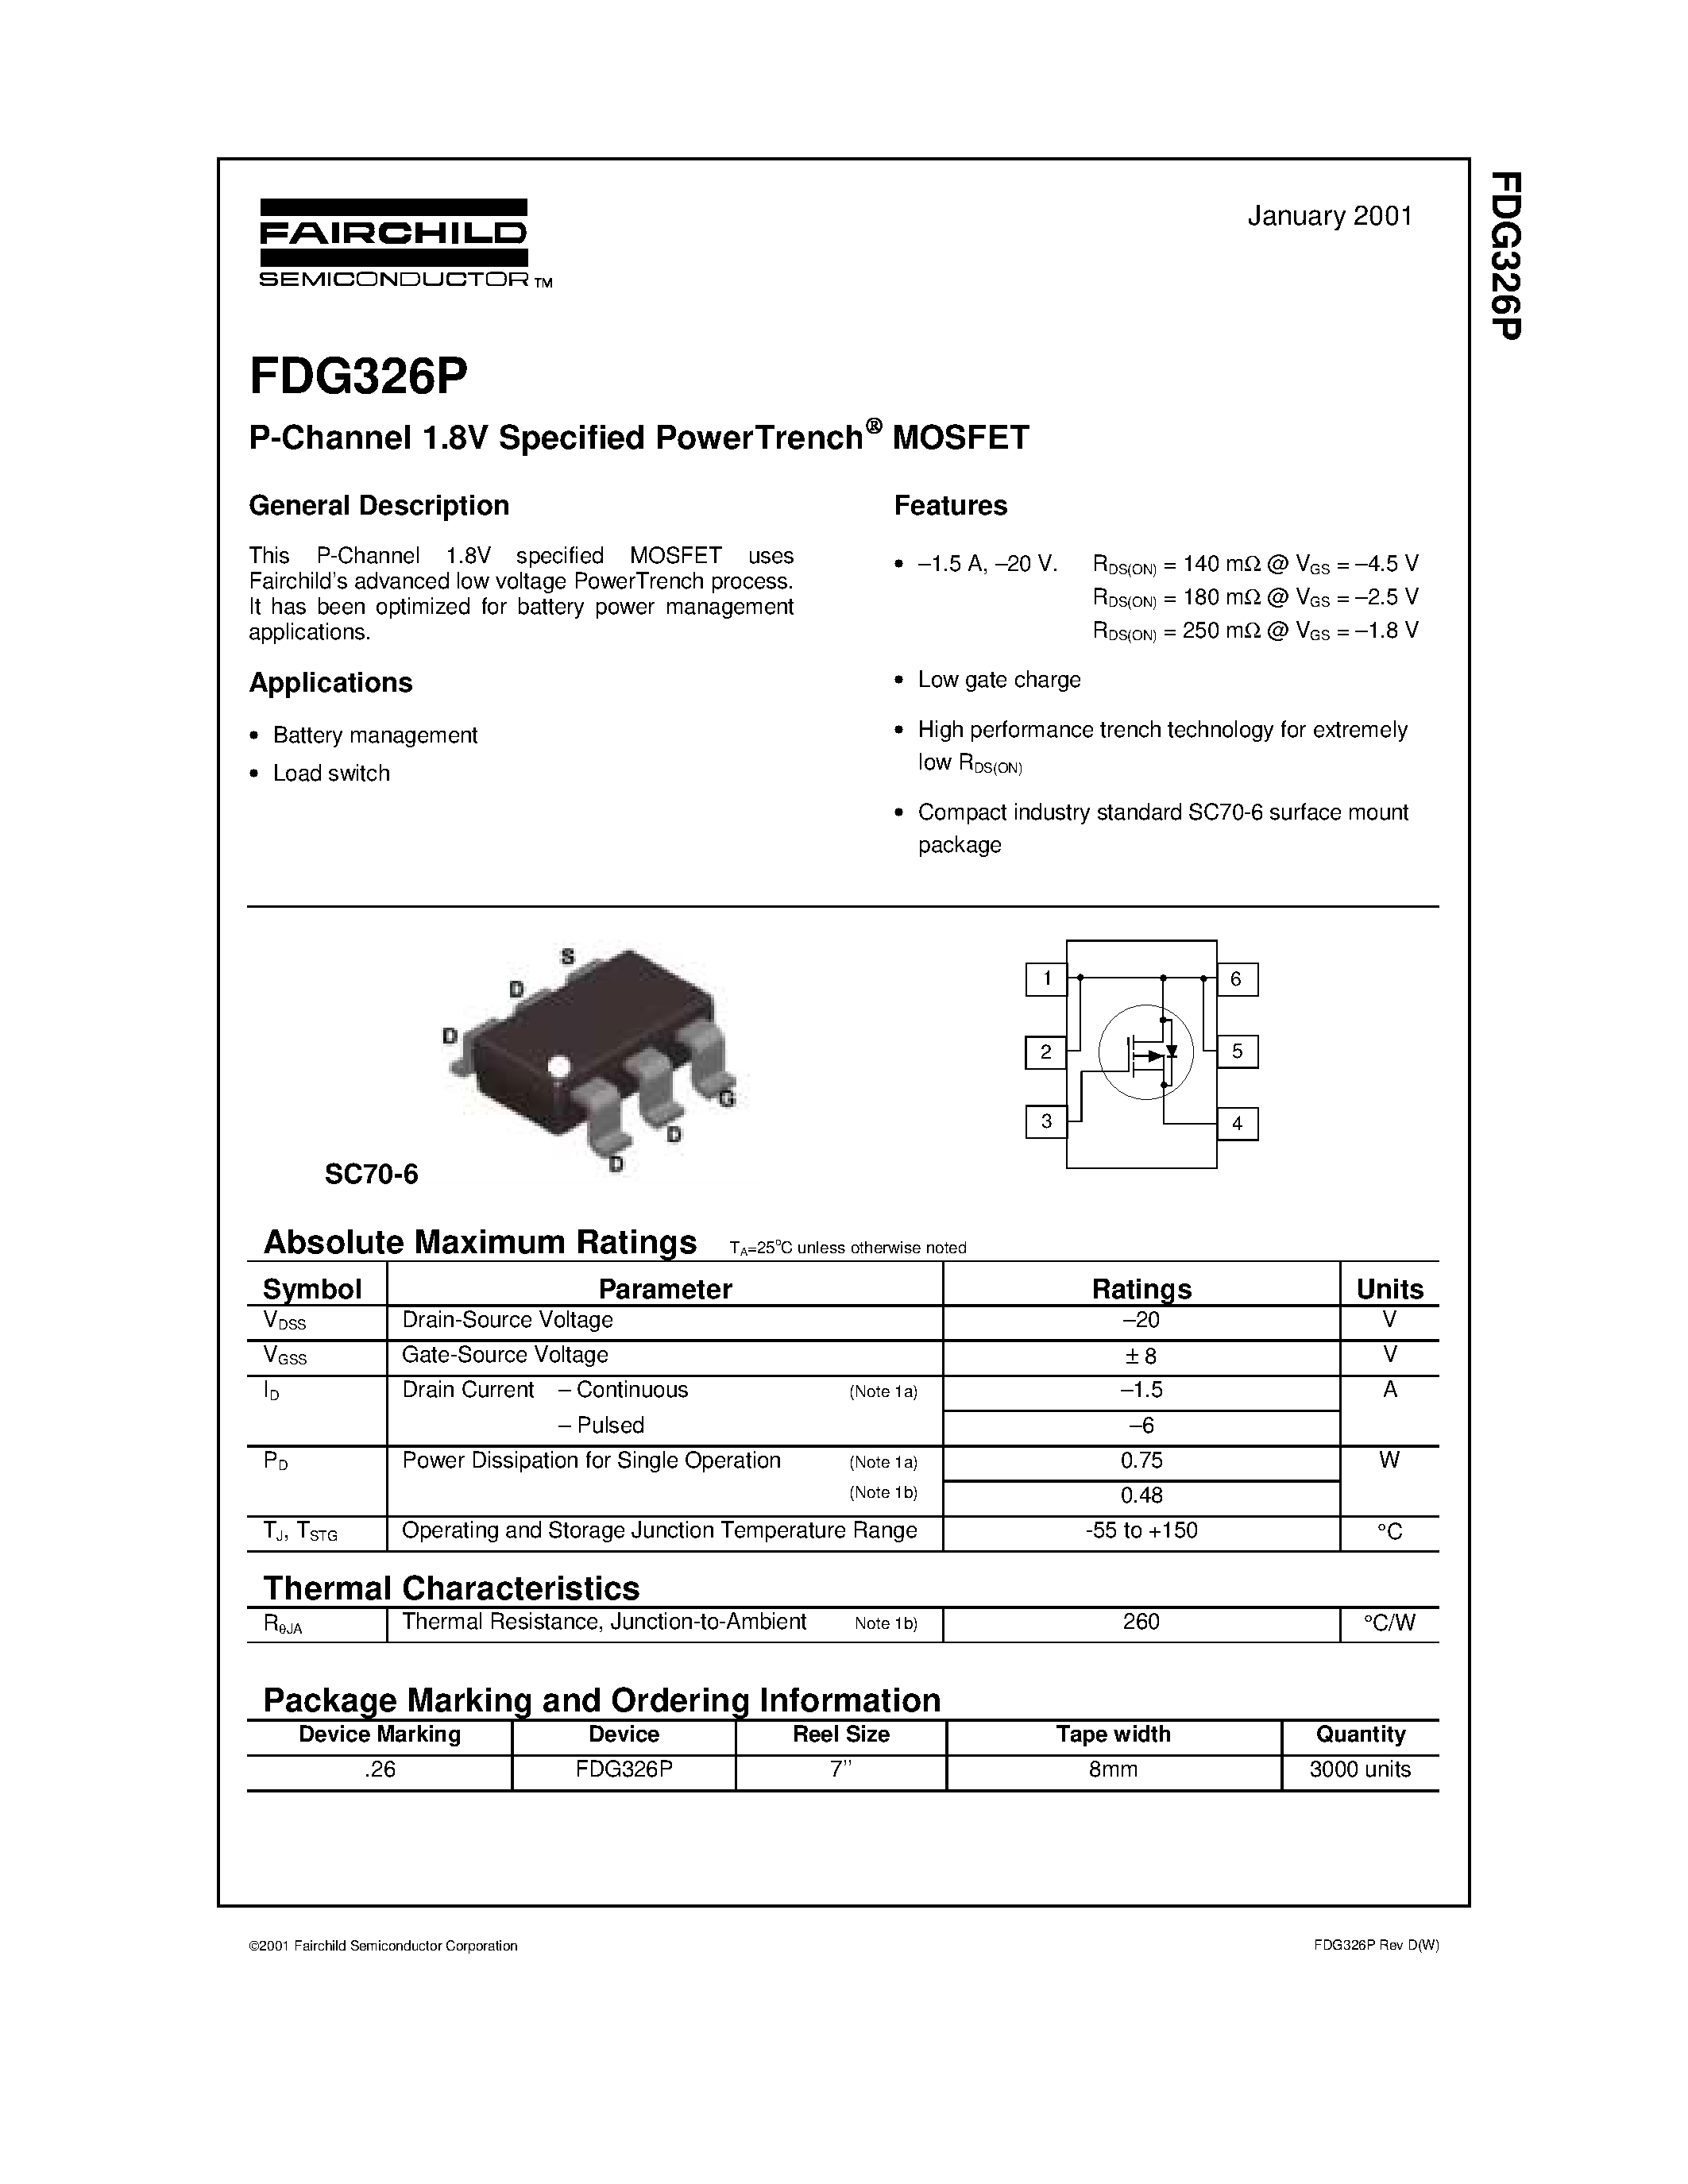 Даташит FDG326P-P-Channel 1.8V Specified PowerTrench MOSFET страница 1